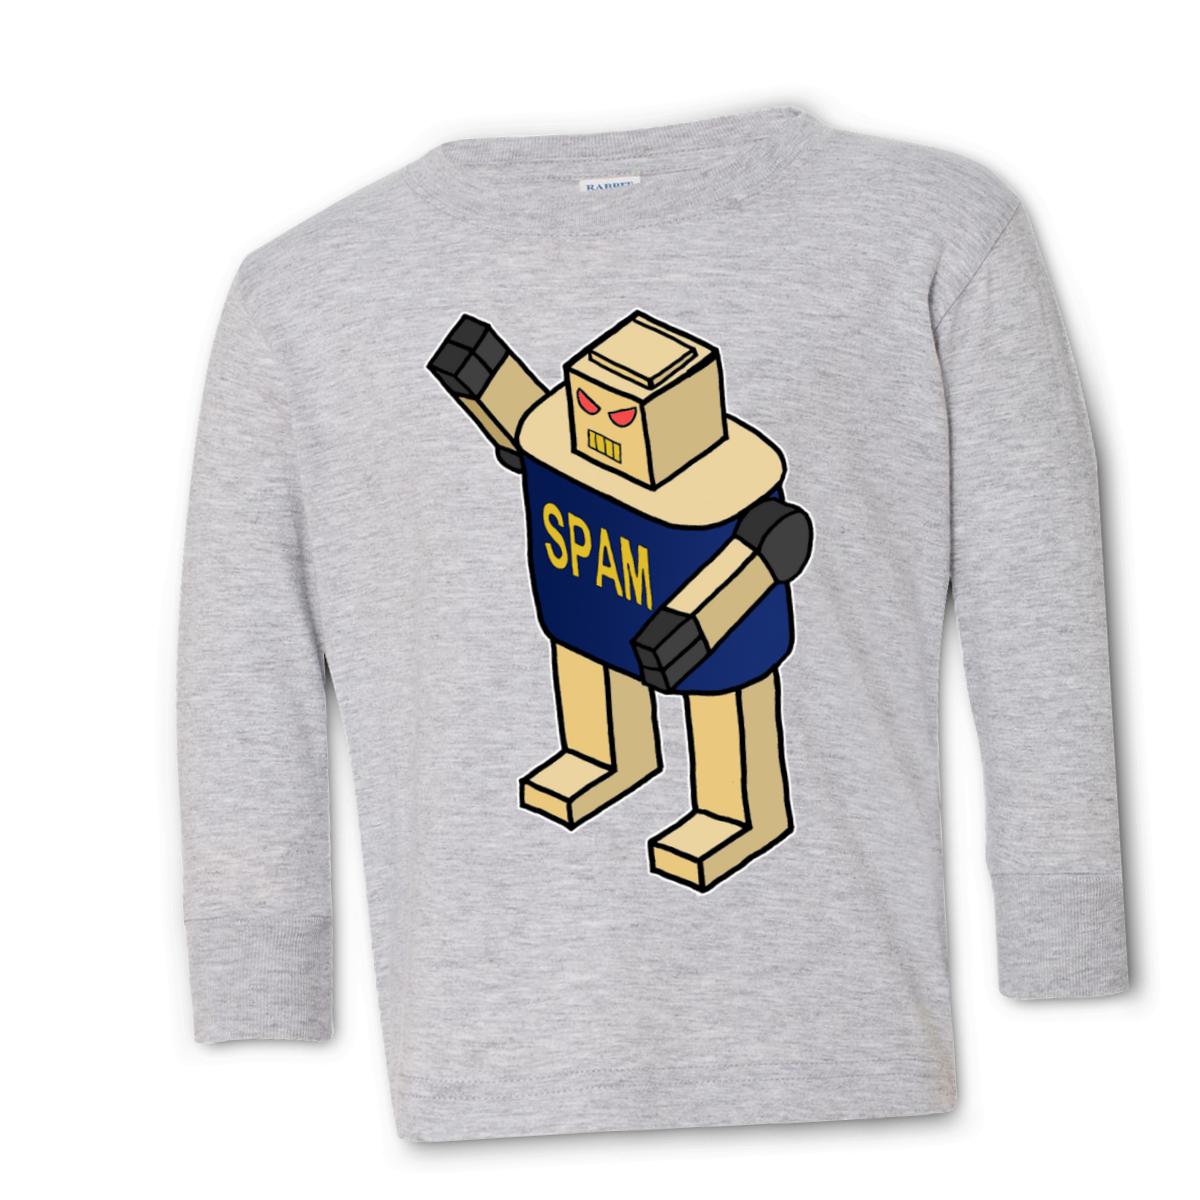 Spam Bot Toddler Long Sleeve Tee 56T heather